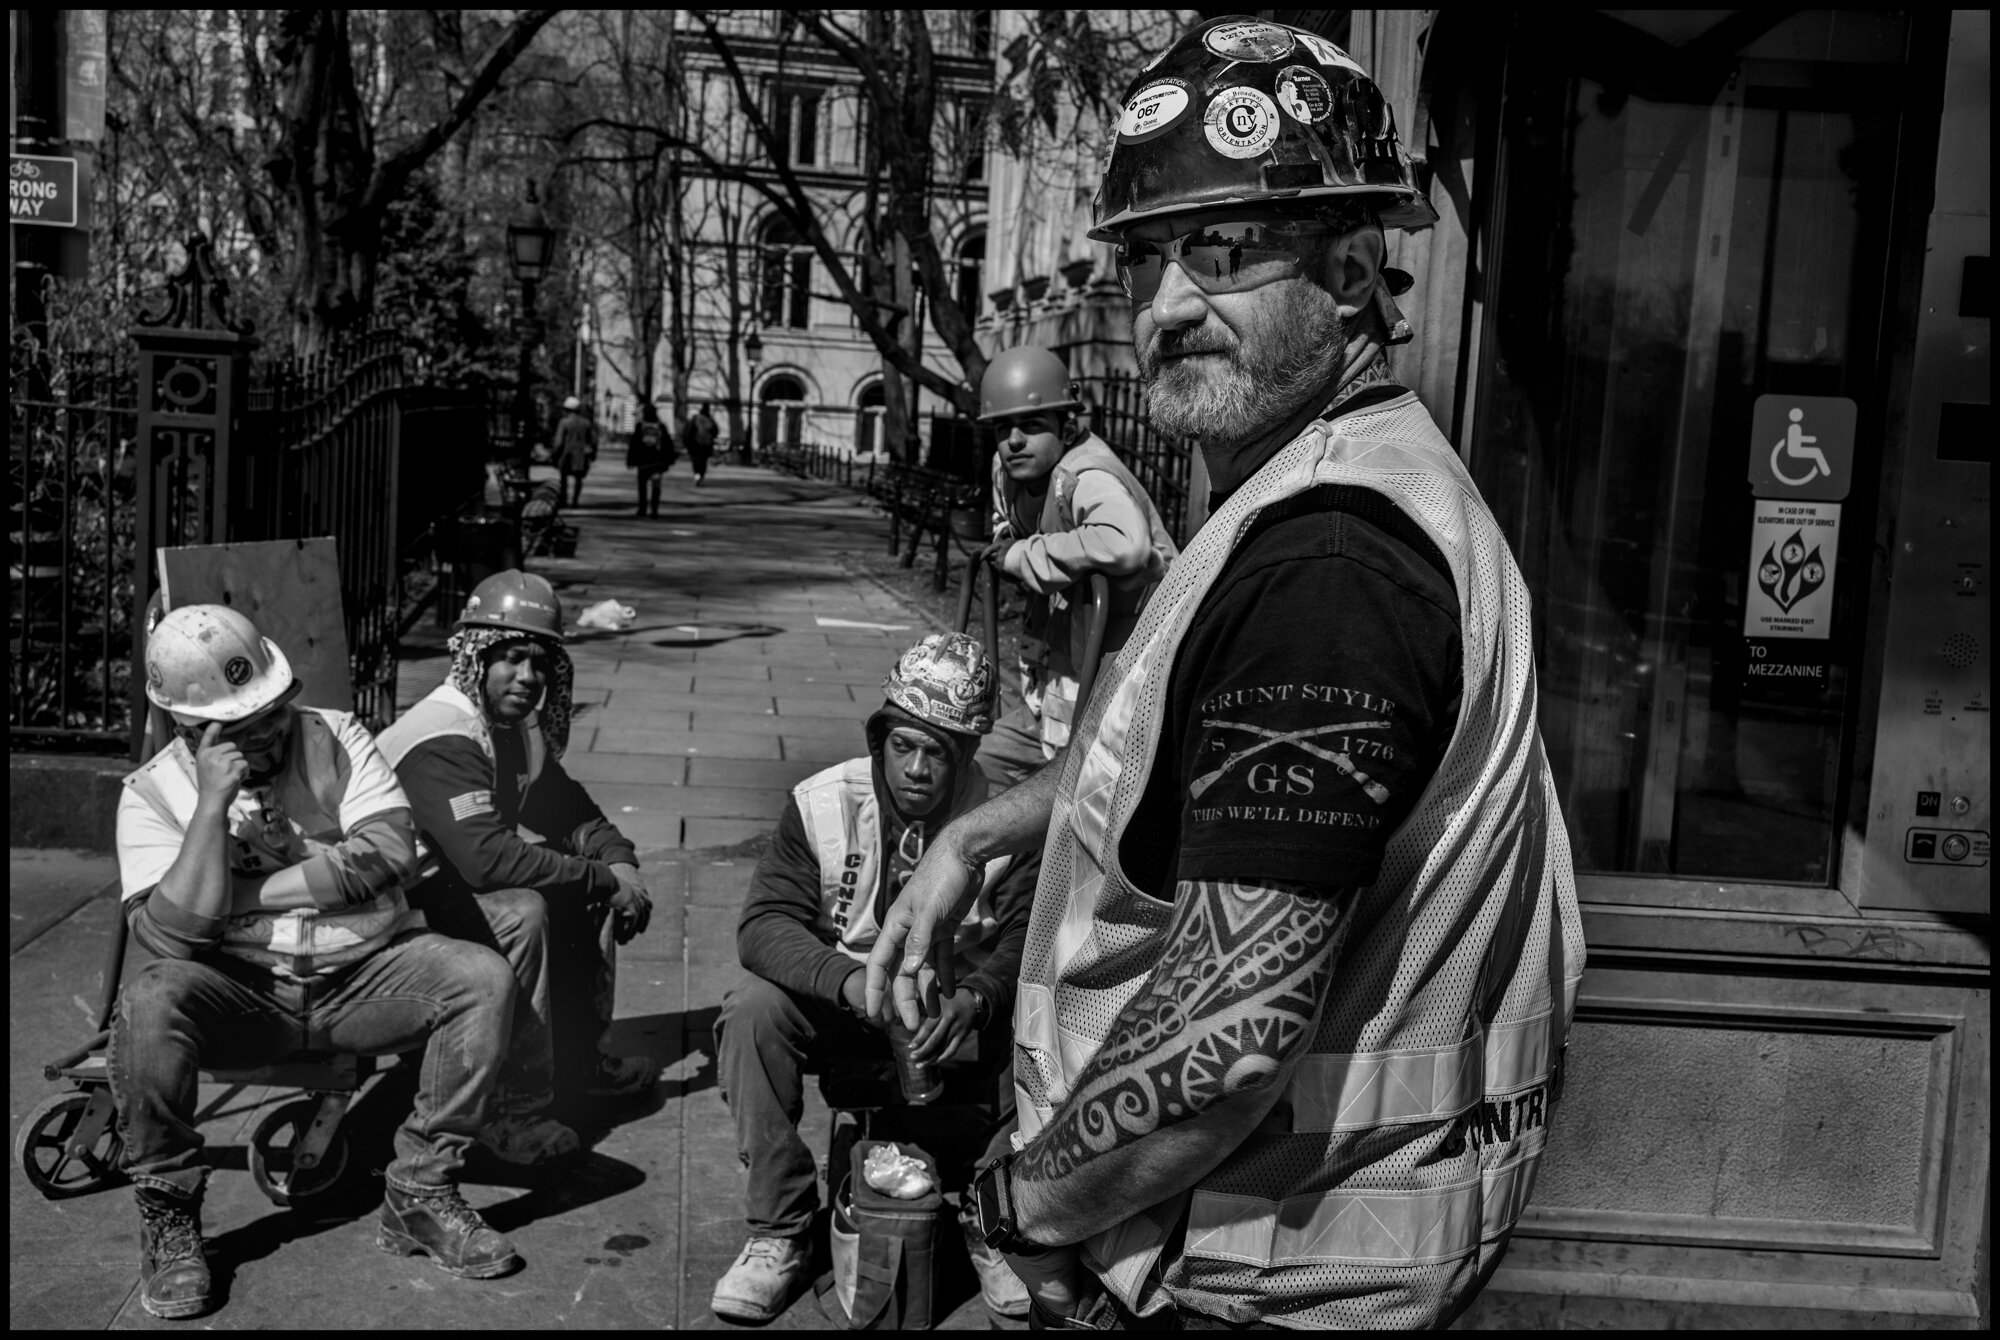  Eric, 50, stands with his fellow colleagues that are all subcontractors working New York’s MTA. They told me that they have not stopped working during this lockdown.  March 26, 2020 ©Peter Turnley  ID# 04-011 